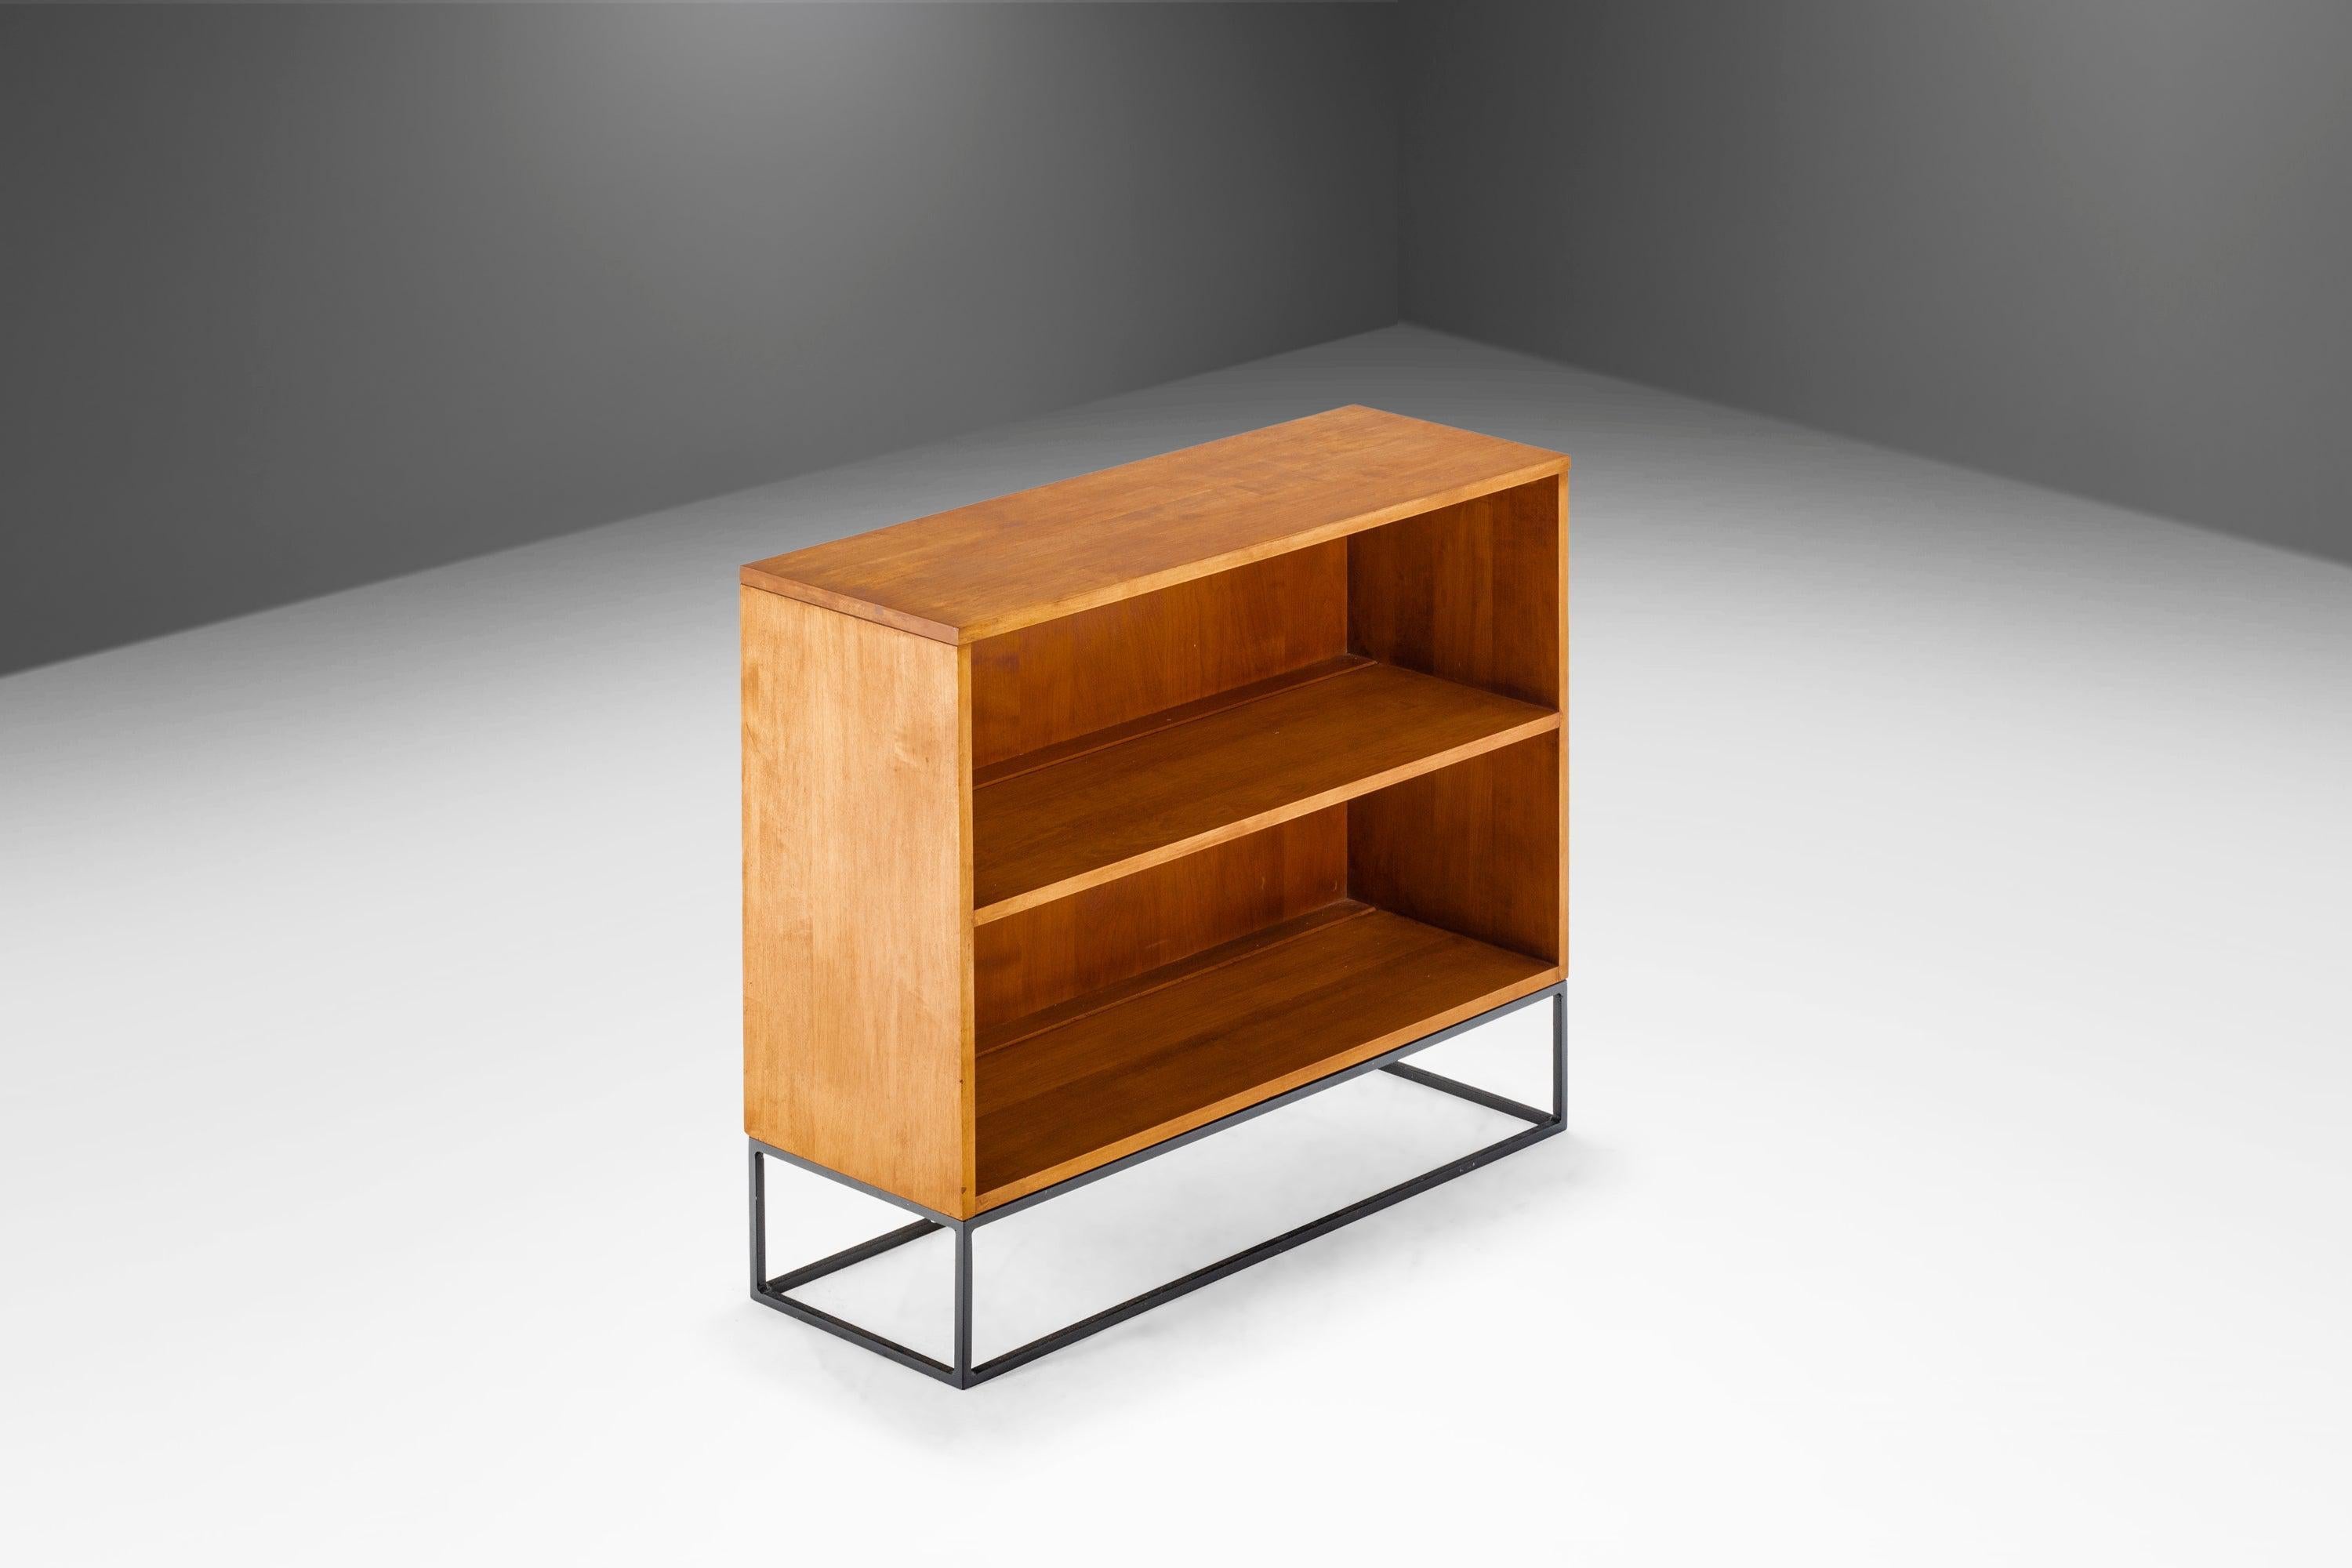 This one of a kind book shelf is the perfect combination of classic design with a modern twist. Designed by the visionary Paul McCobb and produced by the Planner Group this book shelf has recently undergone a transformative transition from simple